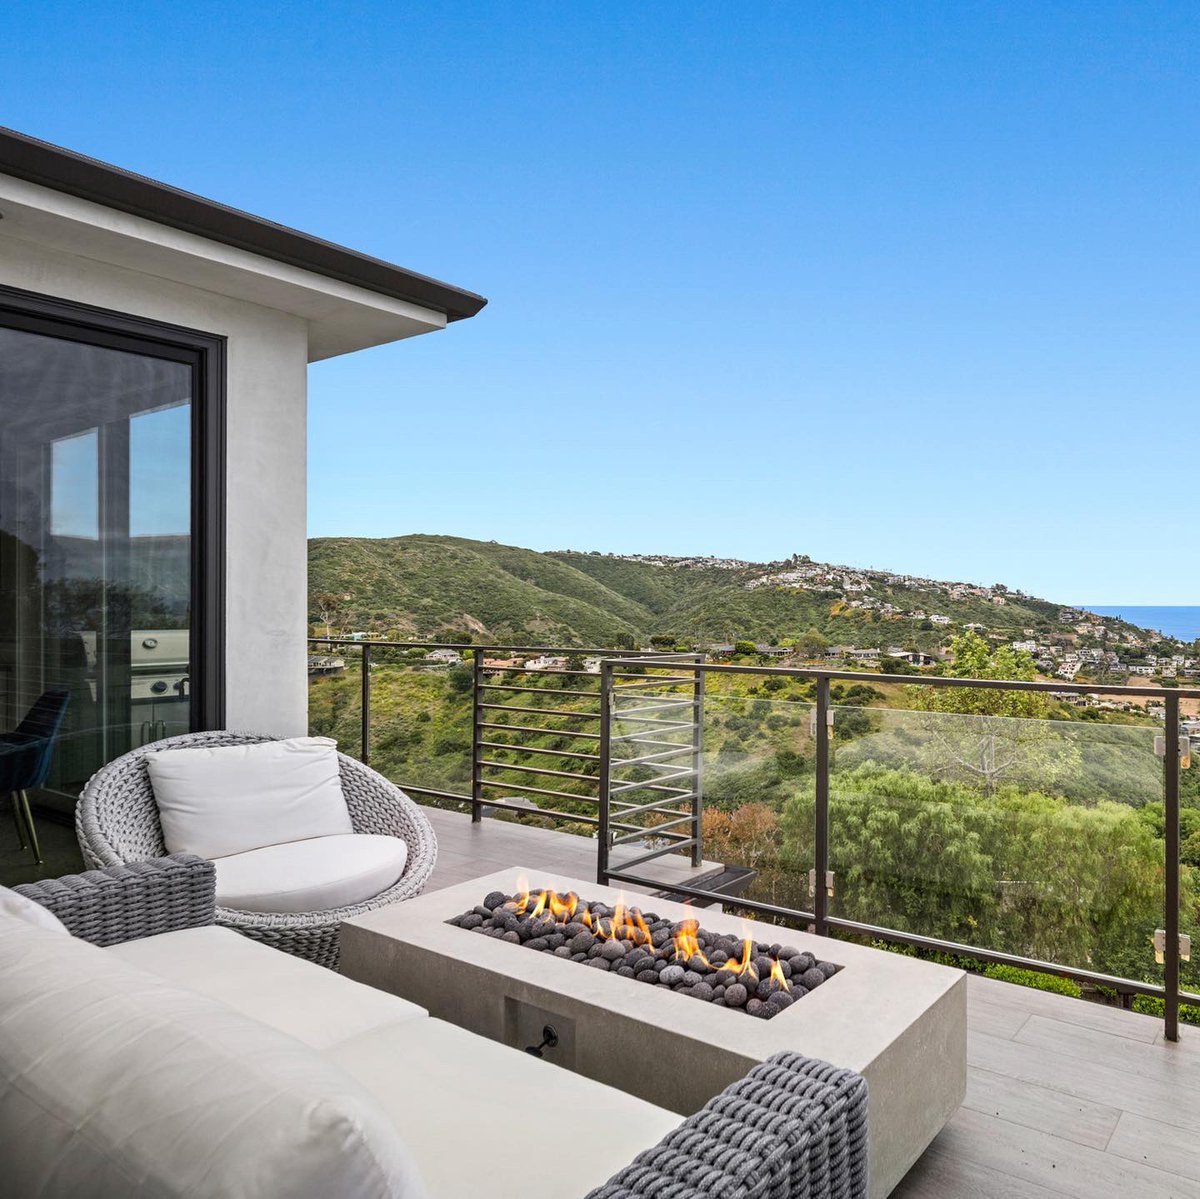 NEW PRICE |📍1797 TEMPLE HILLS, LAGUNA BEACH

Call us to book a private tour at 949-922-9552⁣⁣⁣
⁣⁣⁣livelrealestate.com⁣⁣⁣⁣⁣⁣⁣

#1797TempleHills #newprice #lagunabeach #location #livingroom #realestate #beach #homesweethome #homes #oceanviews